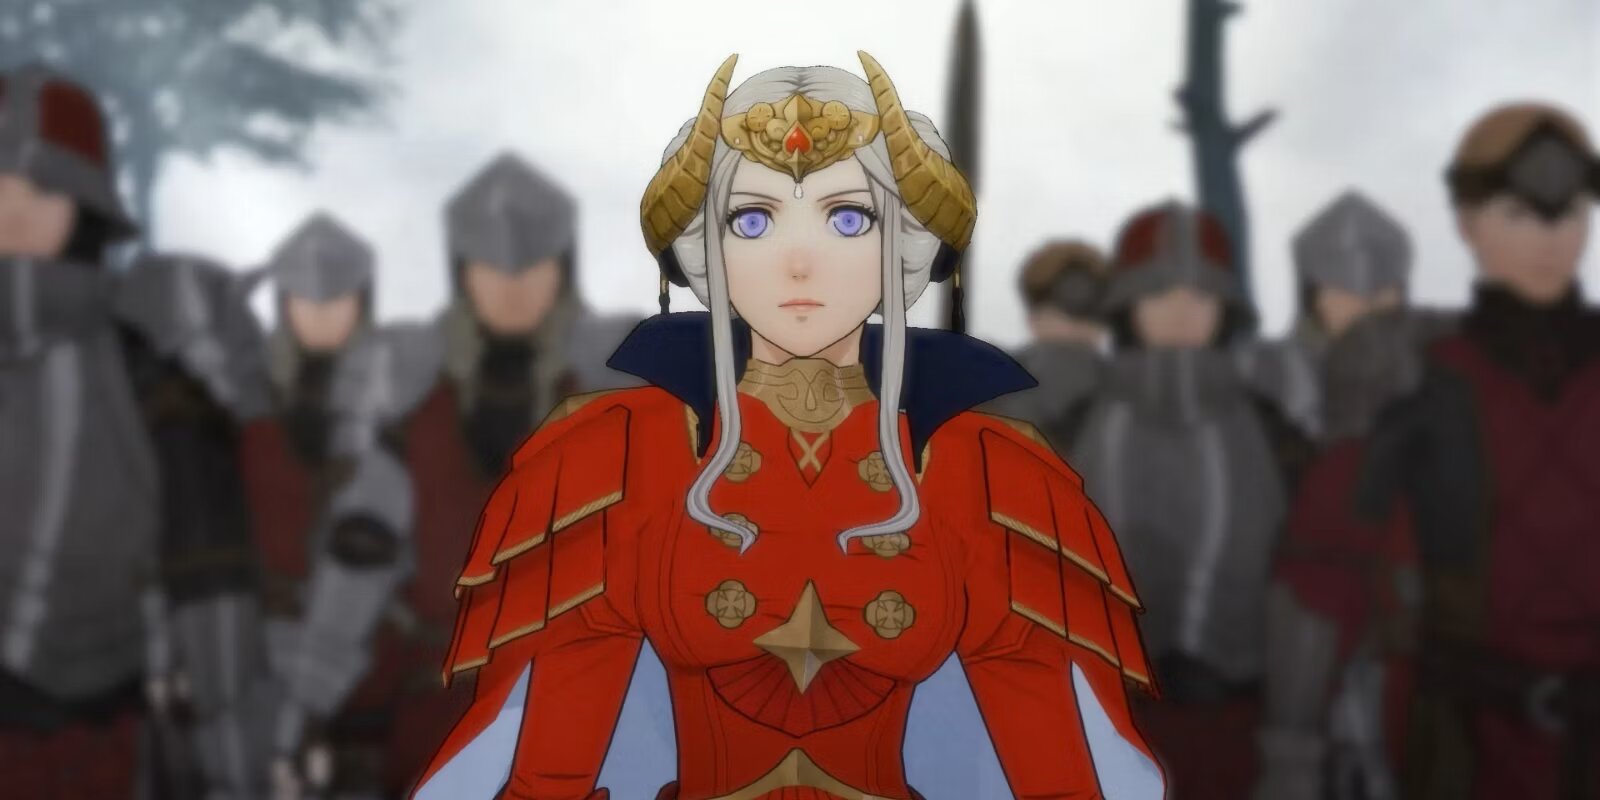 Edelgard with her Empirical Army behind her.